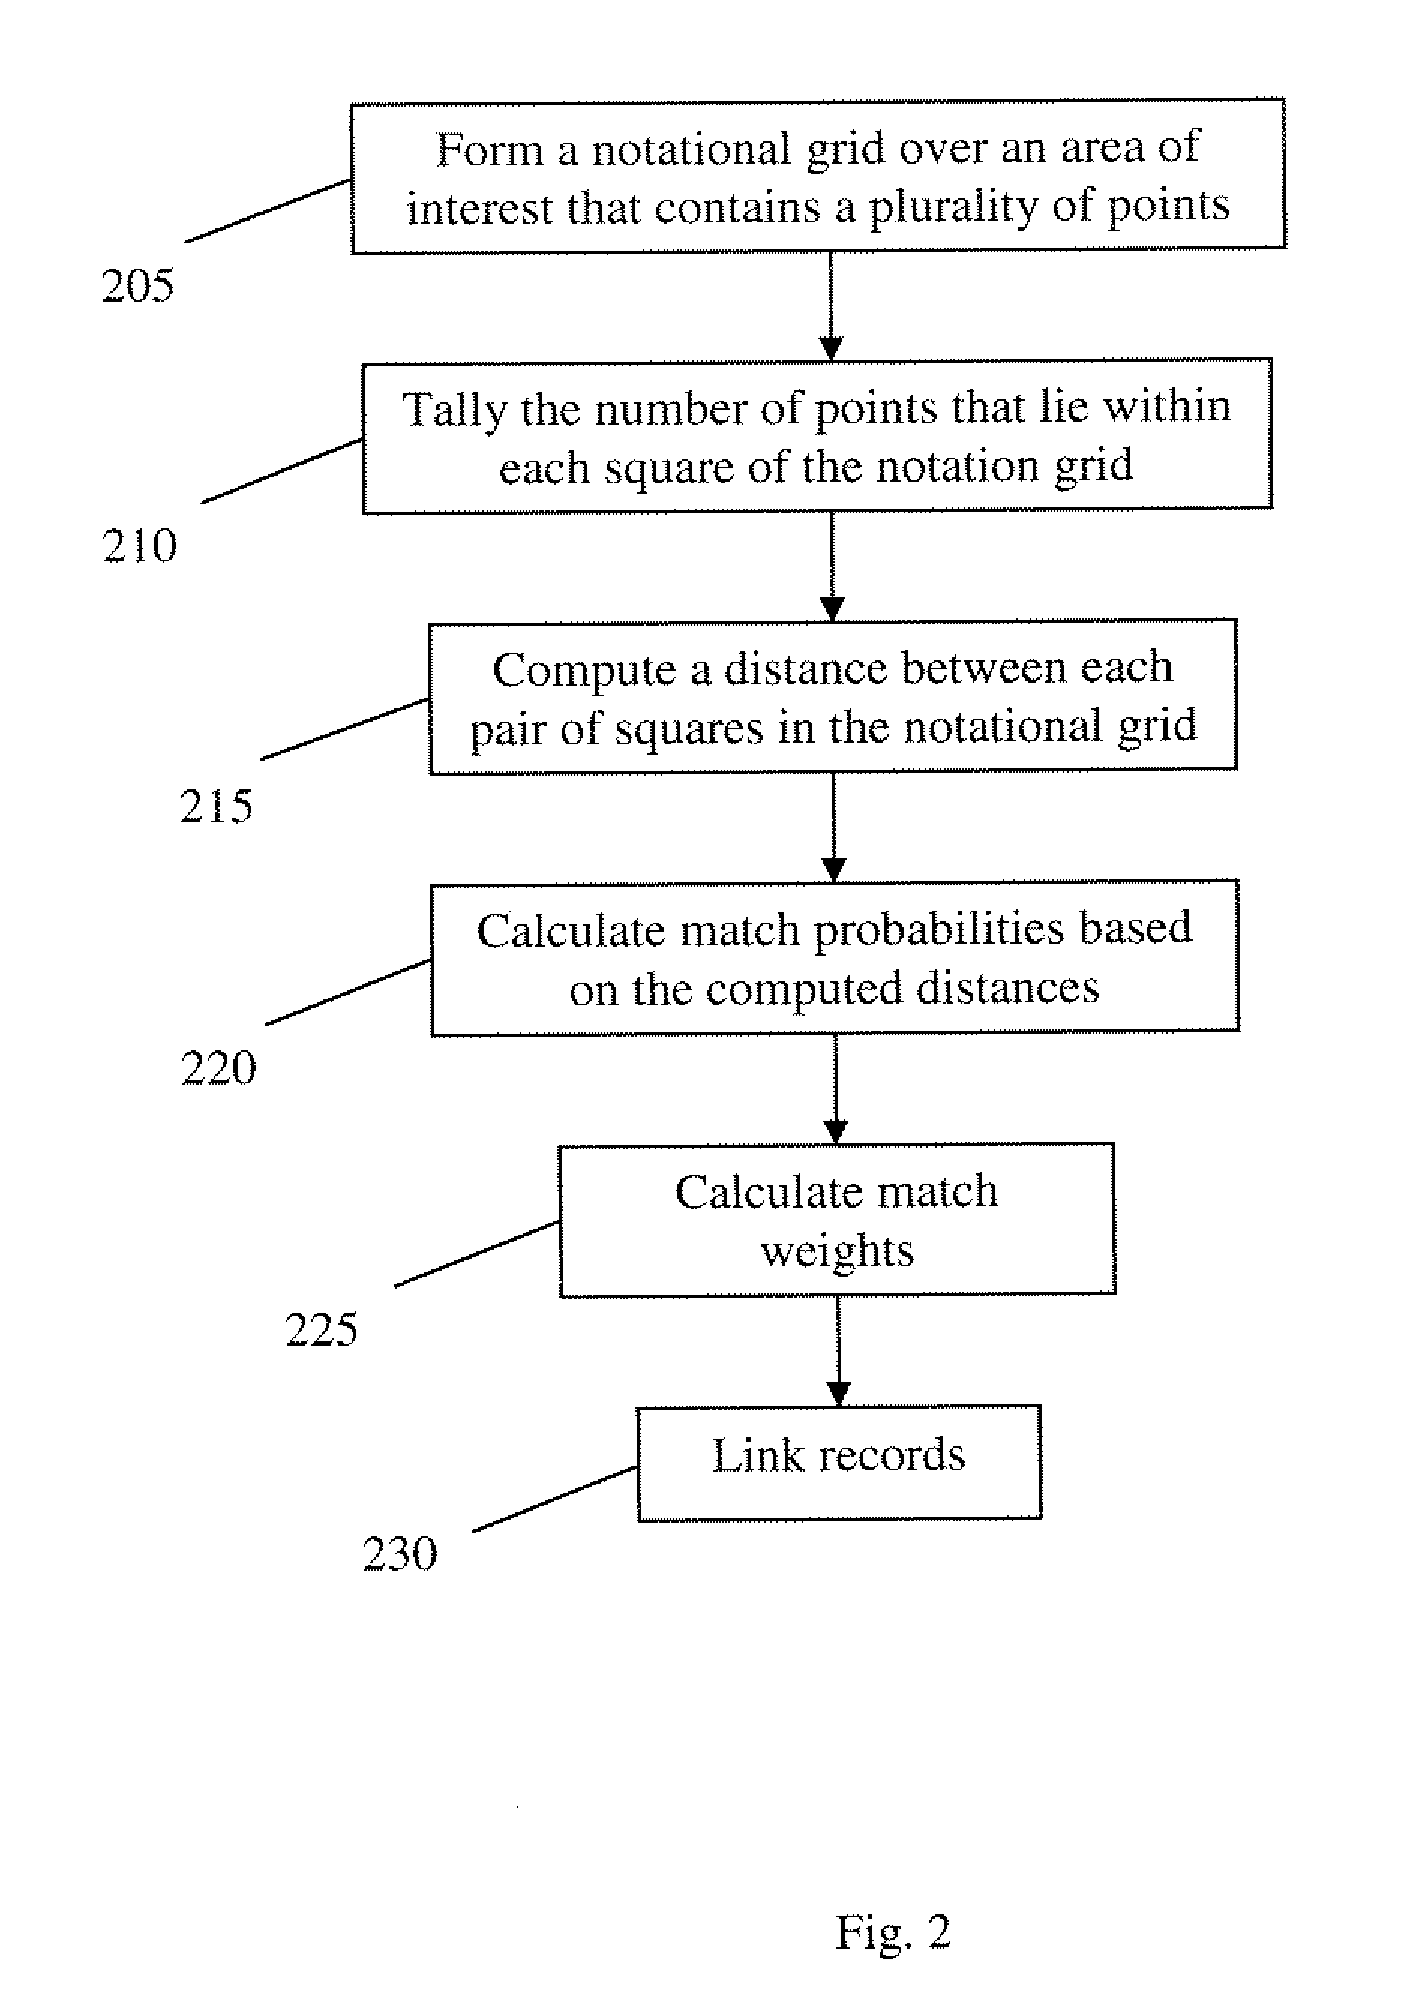 Statistical record linkage calibration for geographic proximity matching